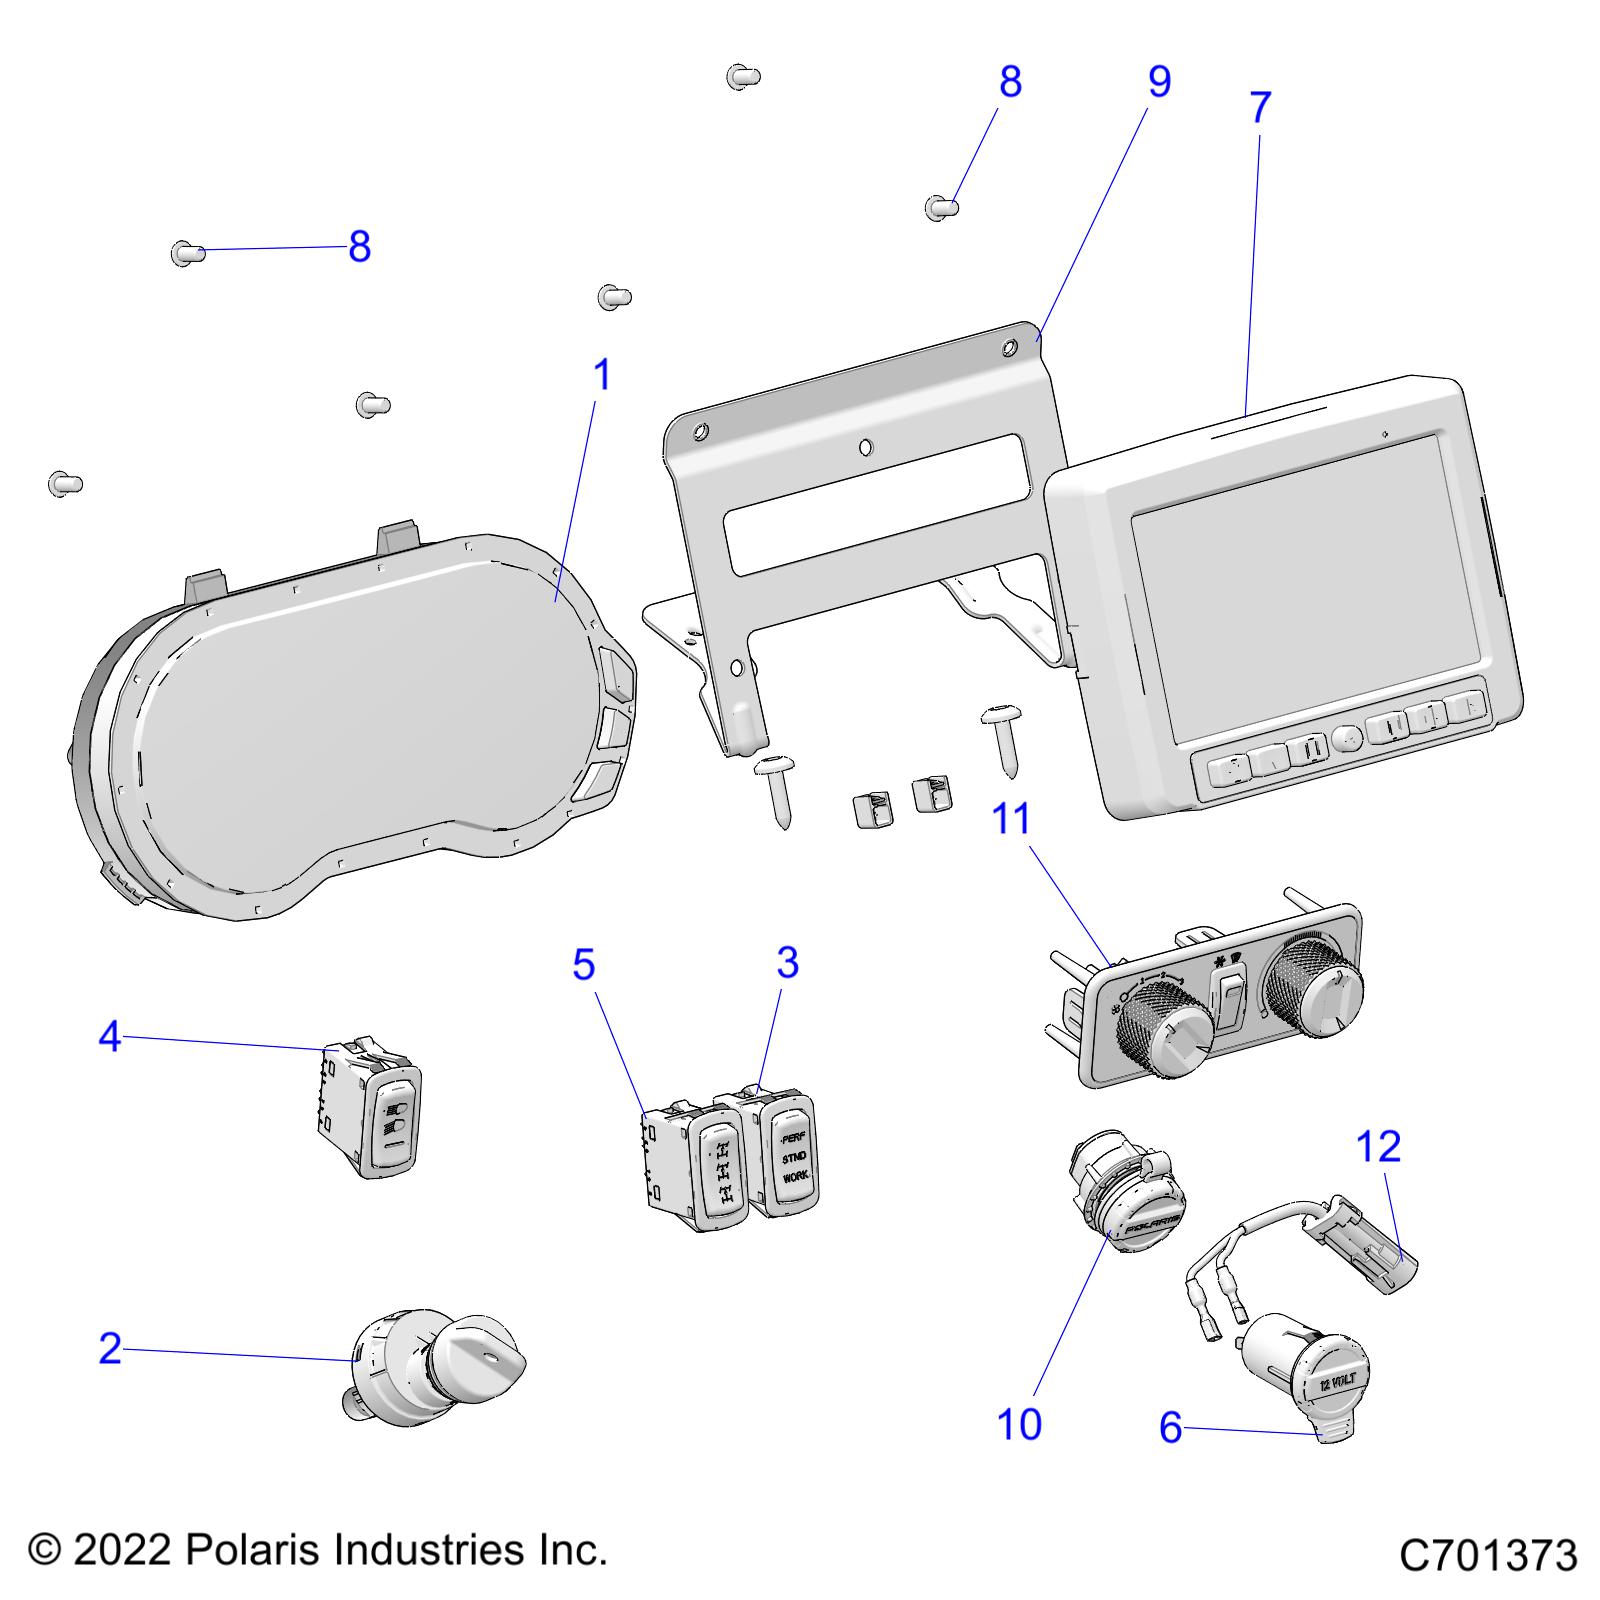 Part Number : 4080274-07 SWITCH-DRIVE MODE